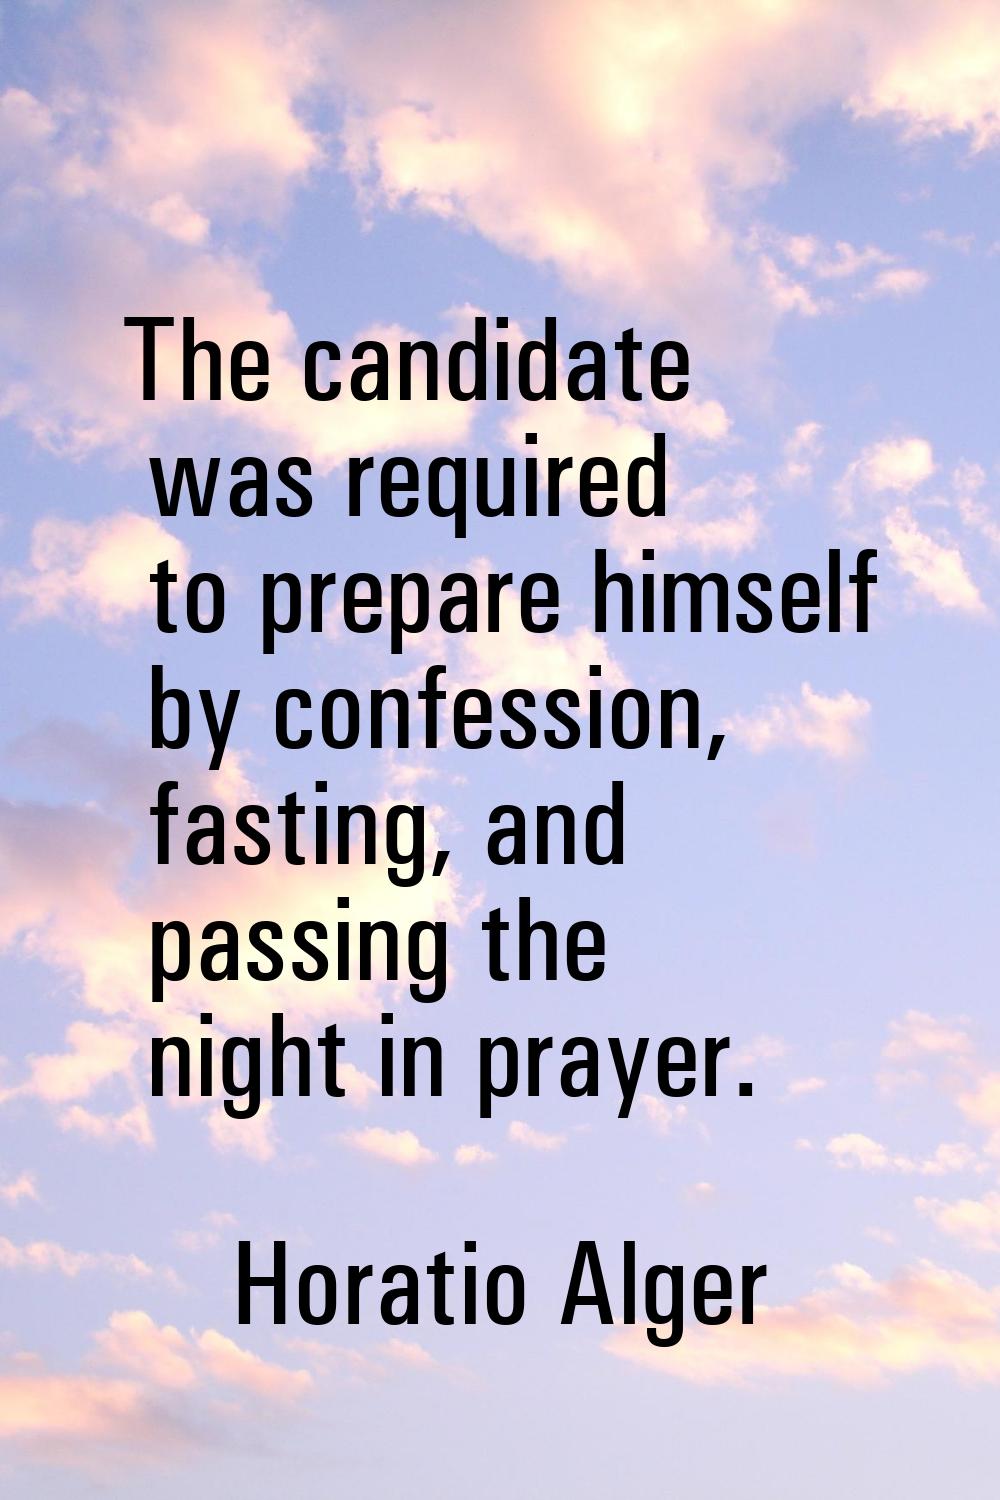 The candidate was required to prepare himself by confession, fasting, and passing the night in pray